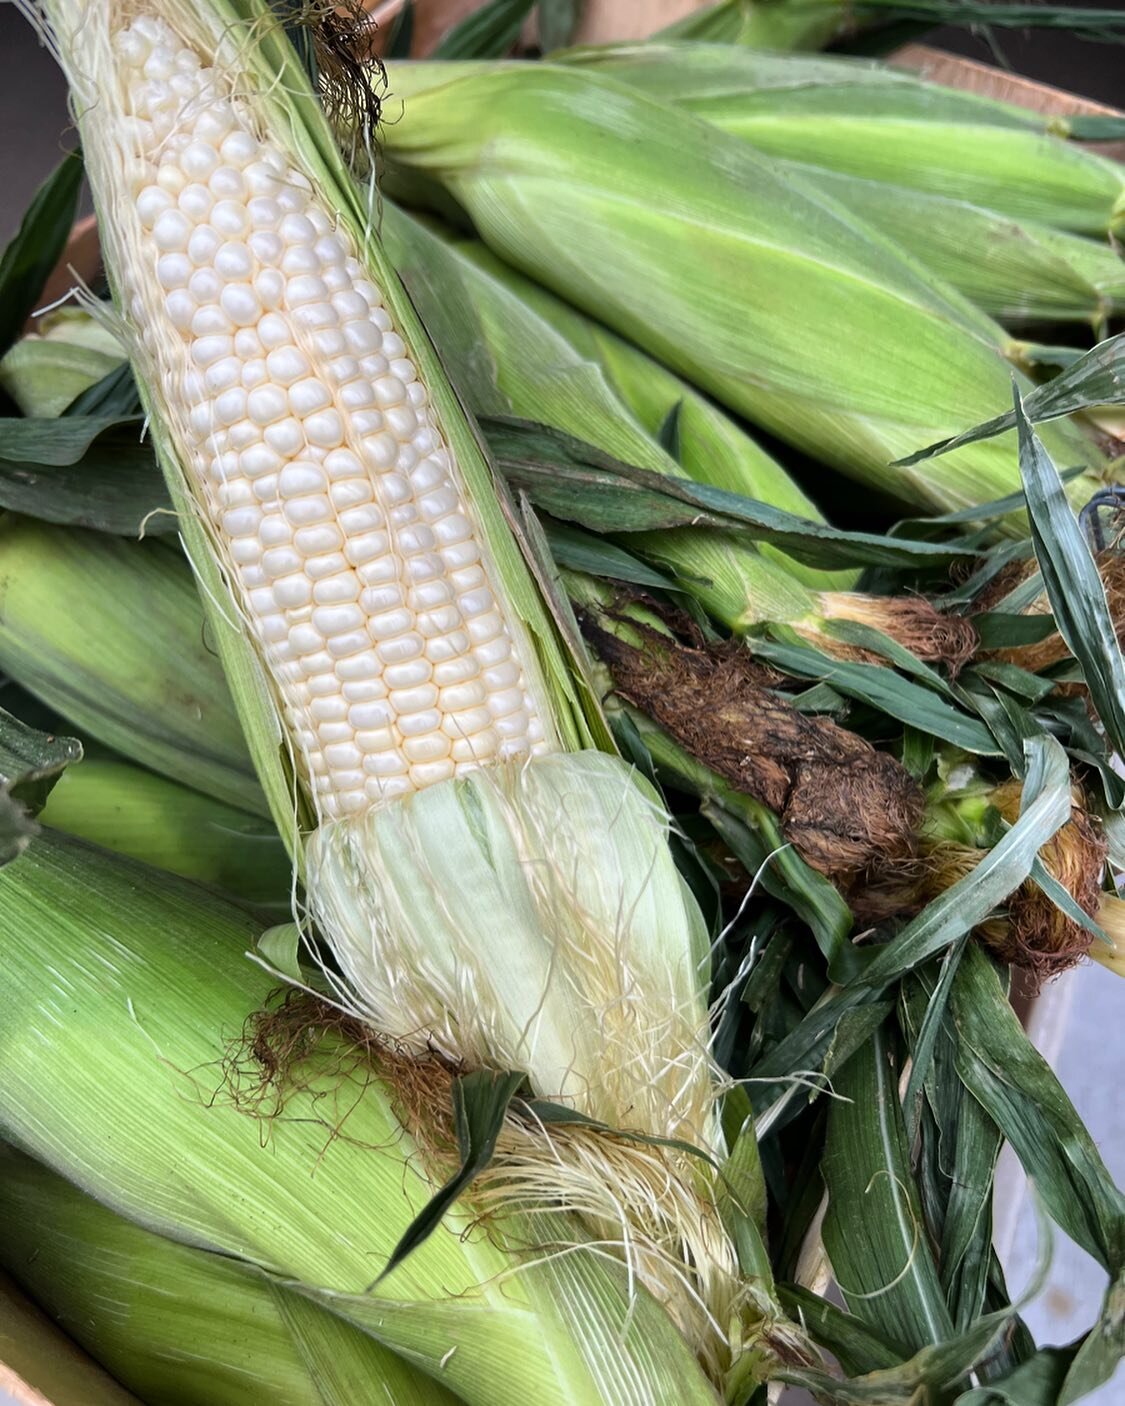 Corn corn corn!! 🌽 Sweet, white corn from Florida is pouring in!

.75&cent;/each or $8/dozen!

Let us do the work for ya! Shucked corn $5.99/6ct or 2/$10! 🌽 

#freshstartfg #startyourdayfresh #floridacorn #produce #rockhall #shoplocal